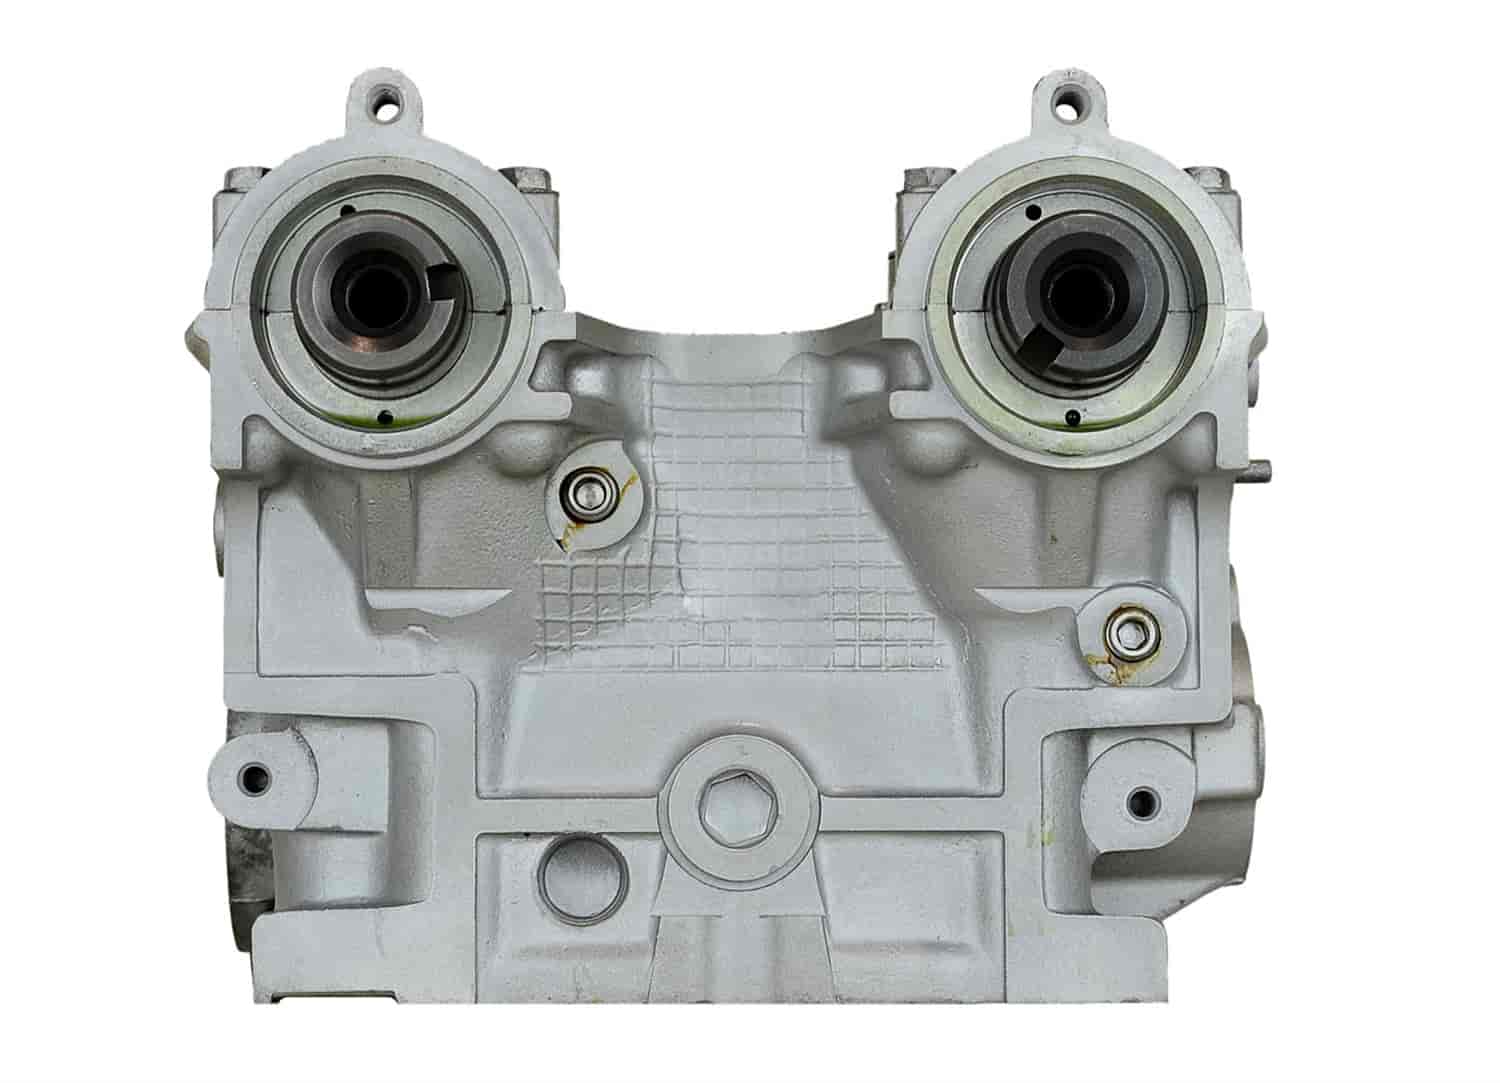 Remanufactured Cylinder Head for 1996-1999 Subaru with 2.5L H4